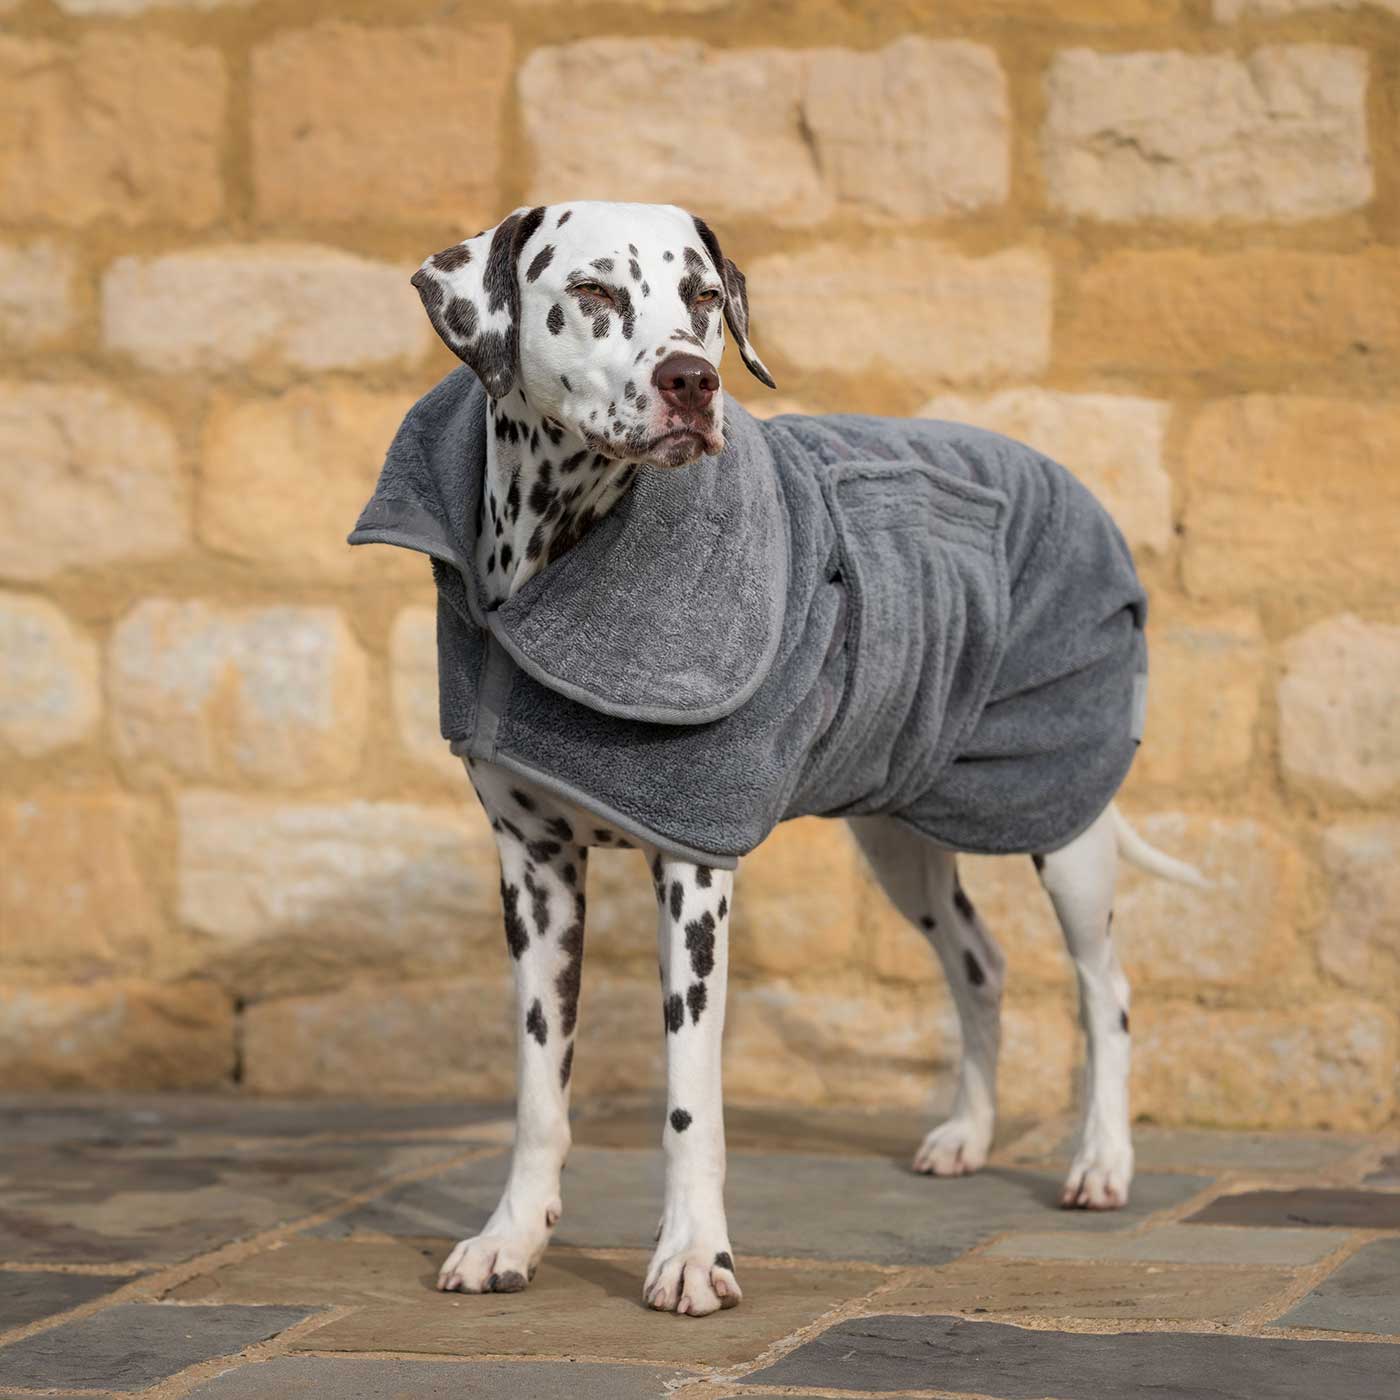 Introducing the ultimate bamboo dog drying coat in beautiful grey Gun Metal, made from luxurious bamboo to aid sensitive skin featuring adjustable Velcro neck and waist fastening with super absorbent material for easy pet drying! Available now at Lords & Labradors US, In five sizes and four colors to suit all breeds!